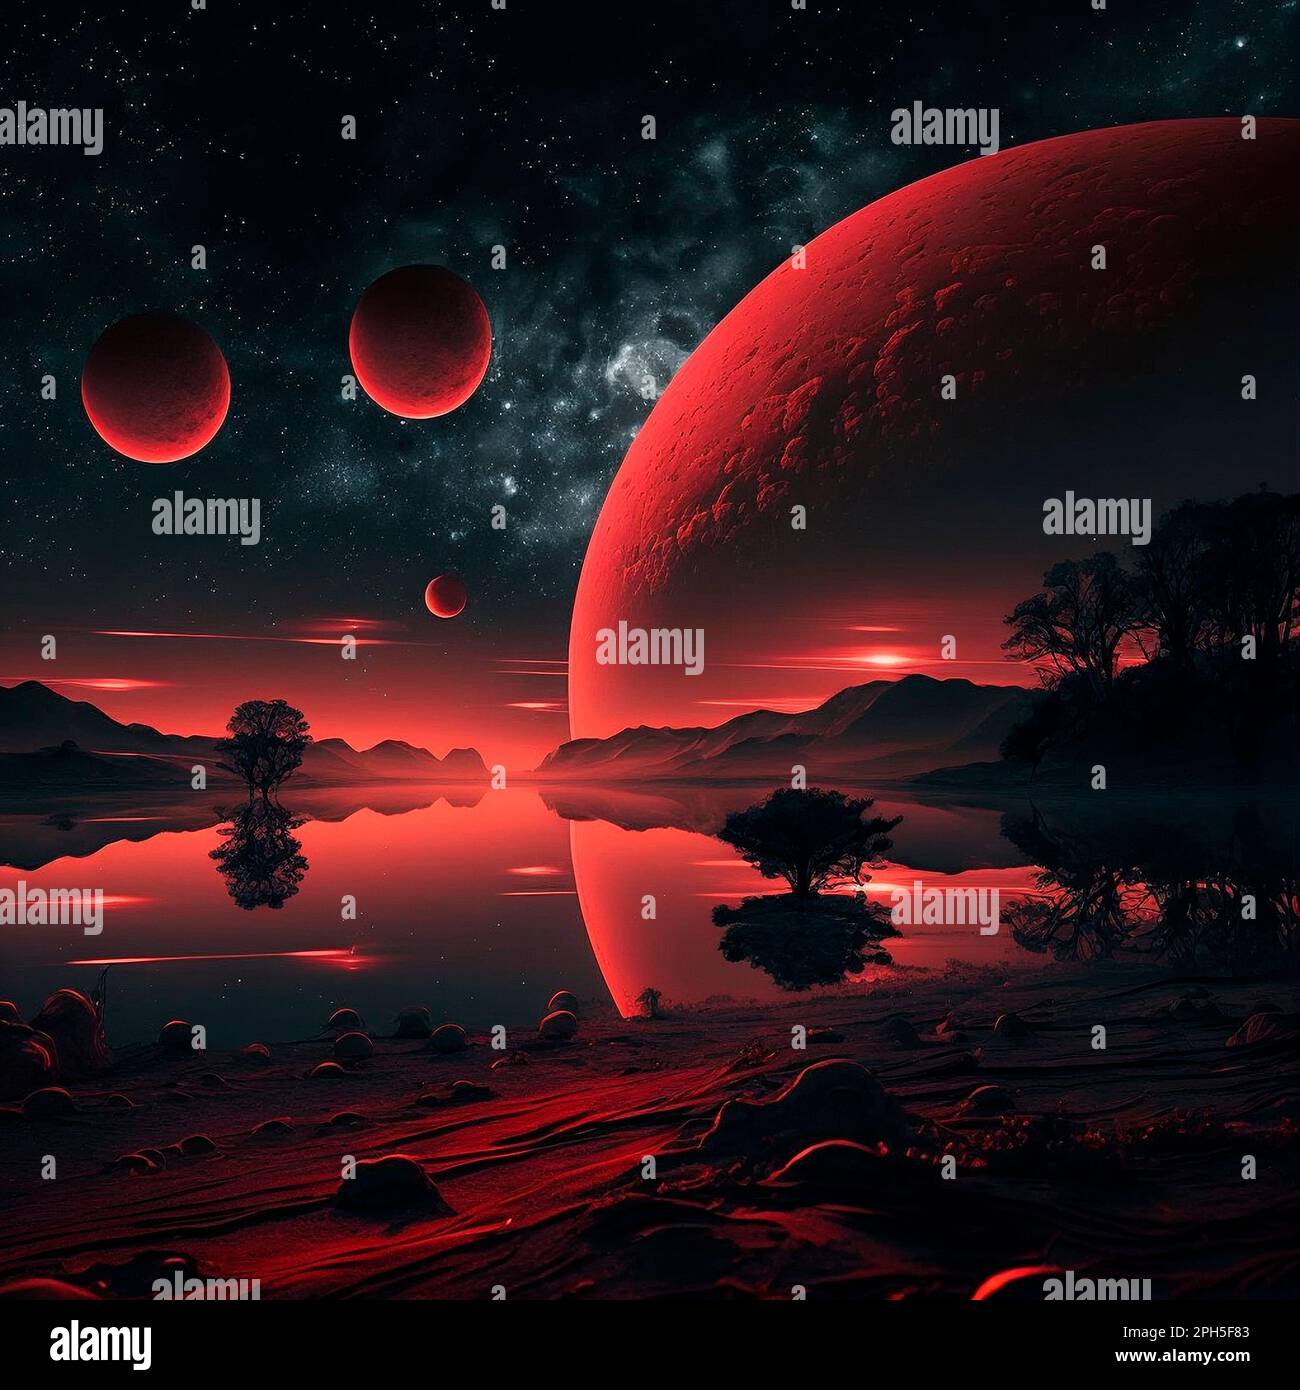 fantastic space image of the red planets Stock Photo